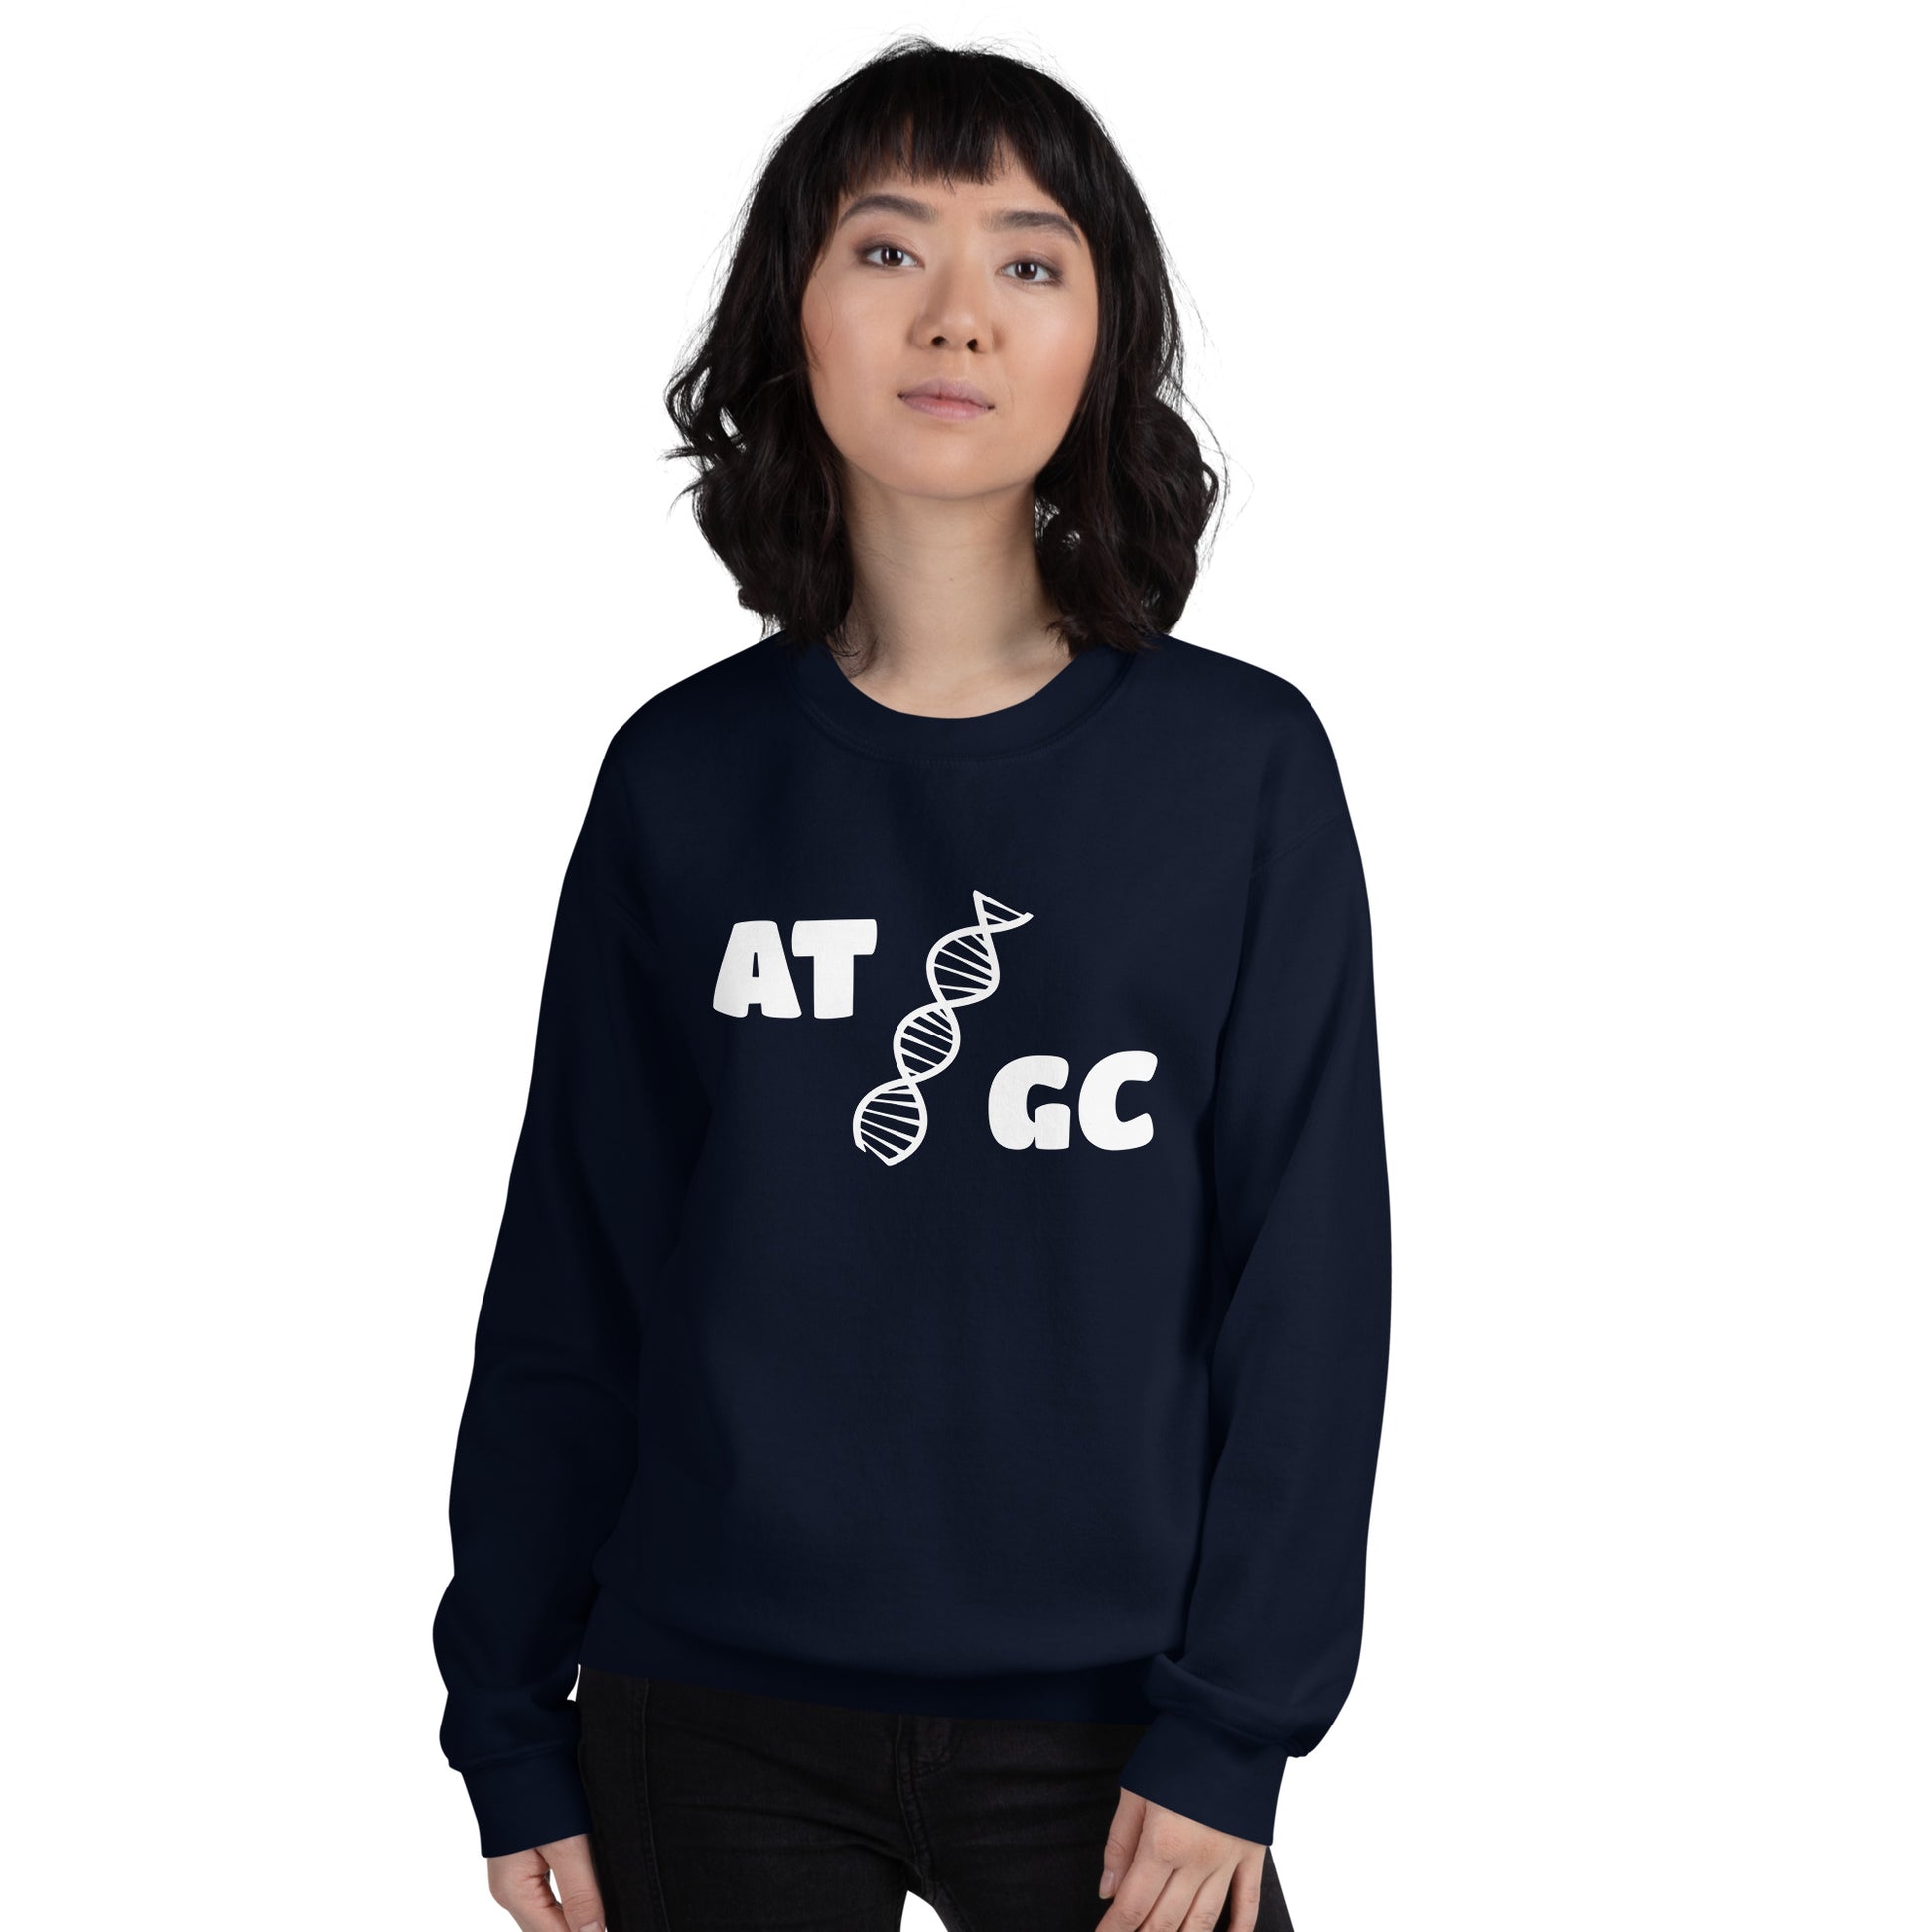 Women with navy blue sweatshirt with image of a DNA string and the text "ATGC"